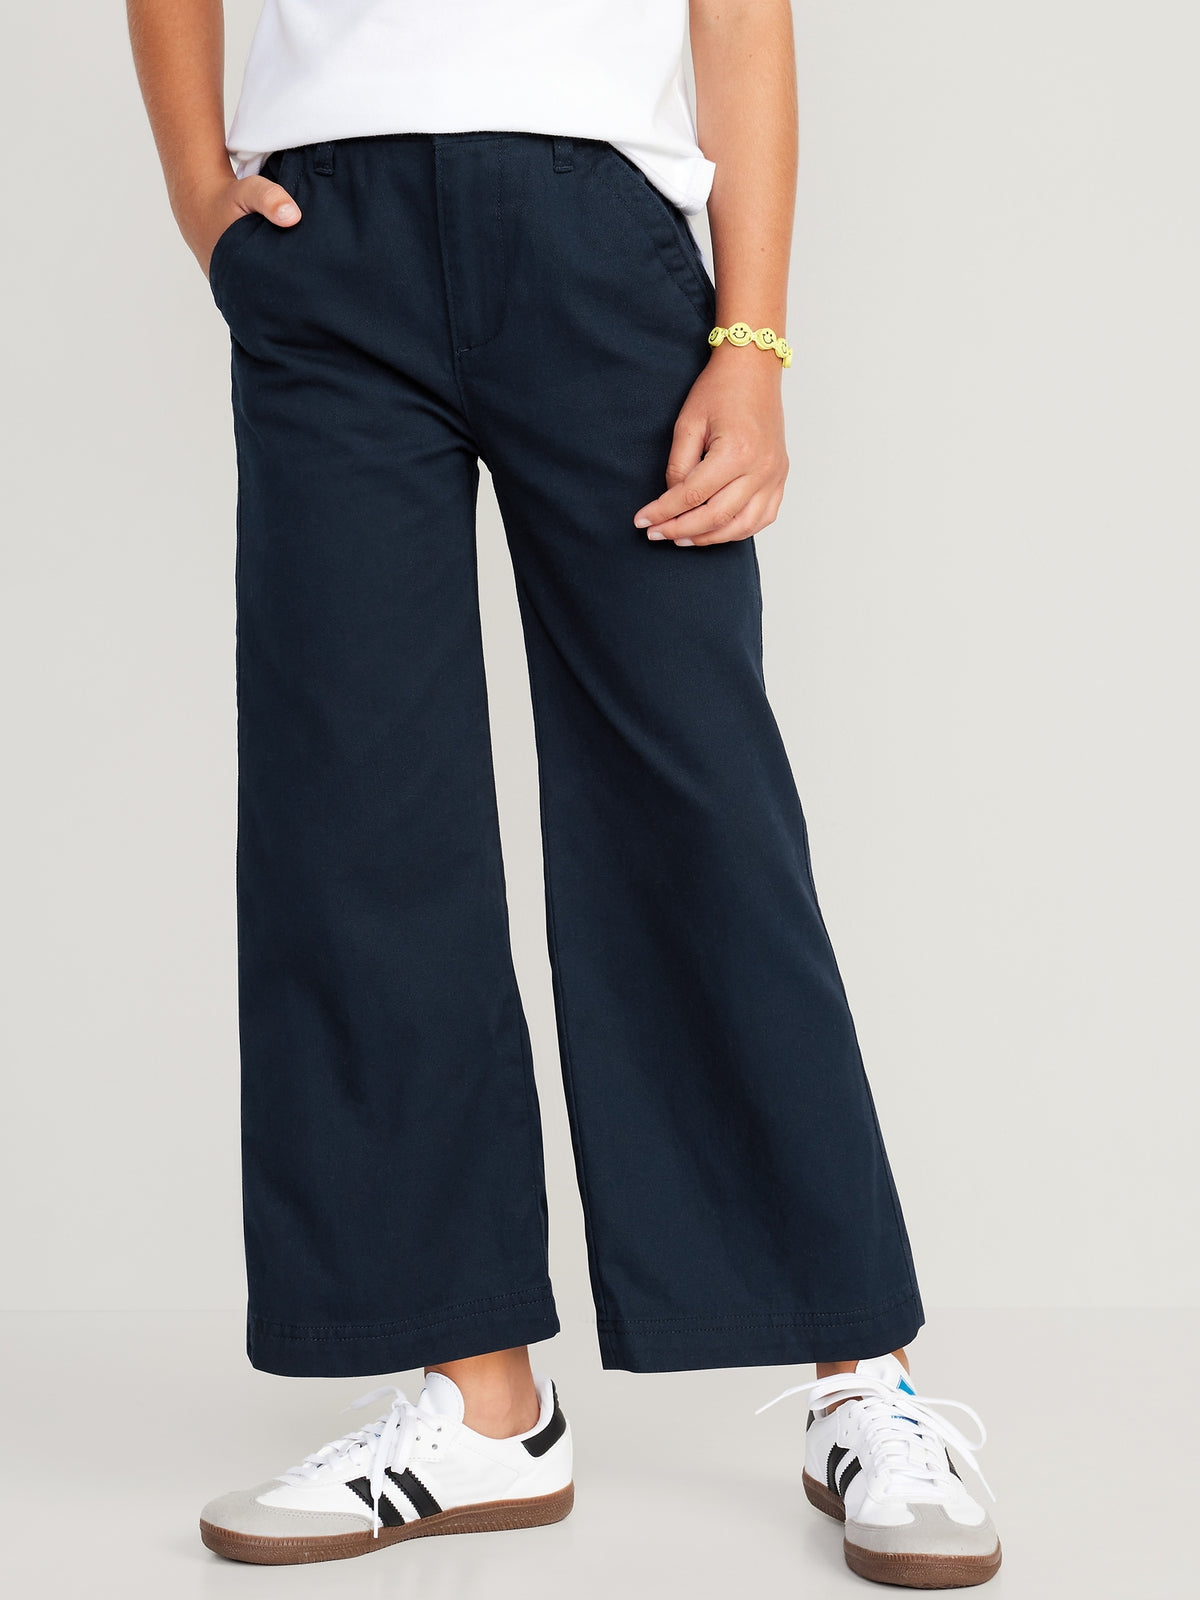 Old Navy Women's Linen Pants ONLY $12 (Regularly $35)